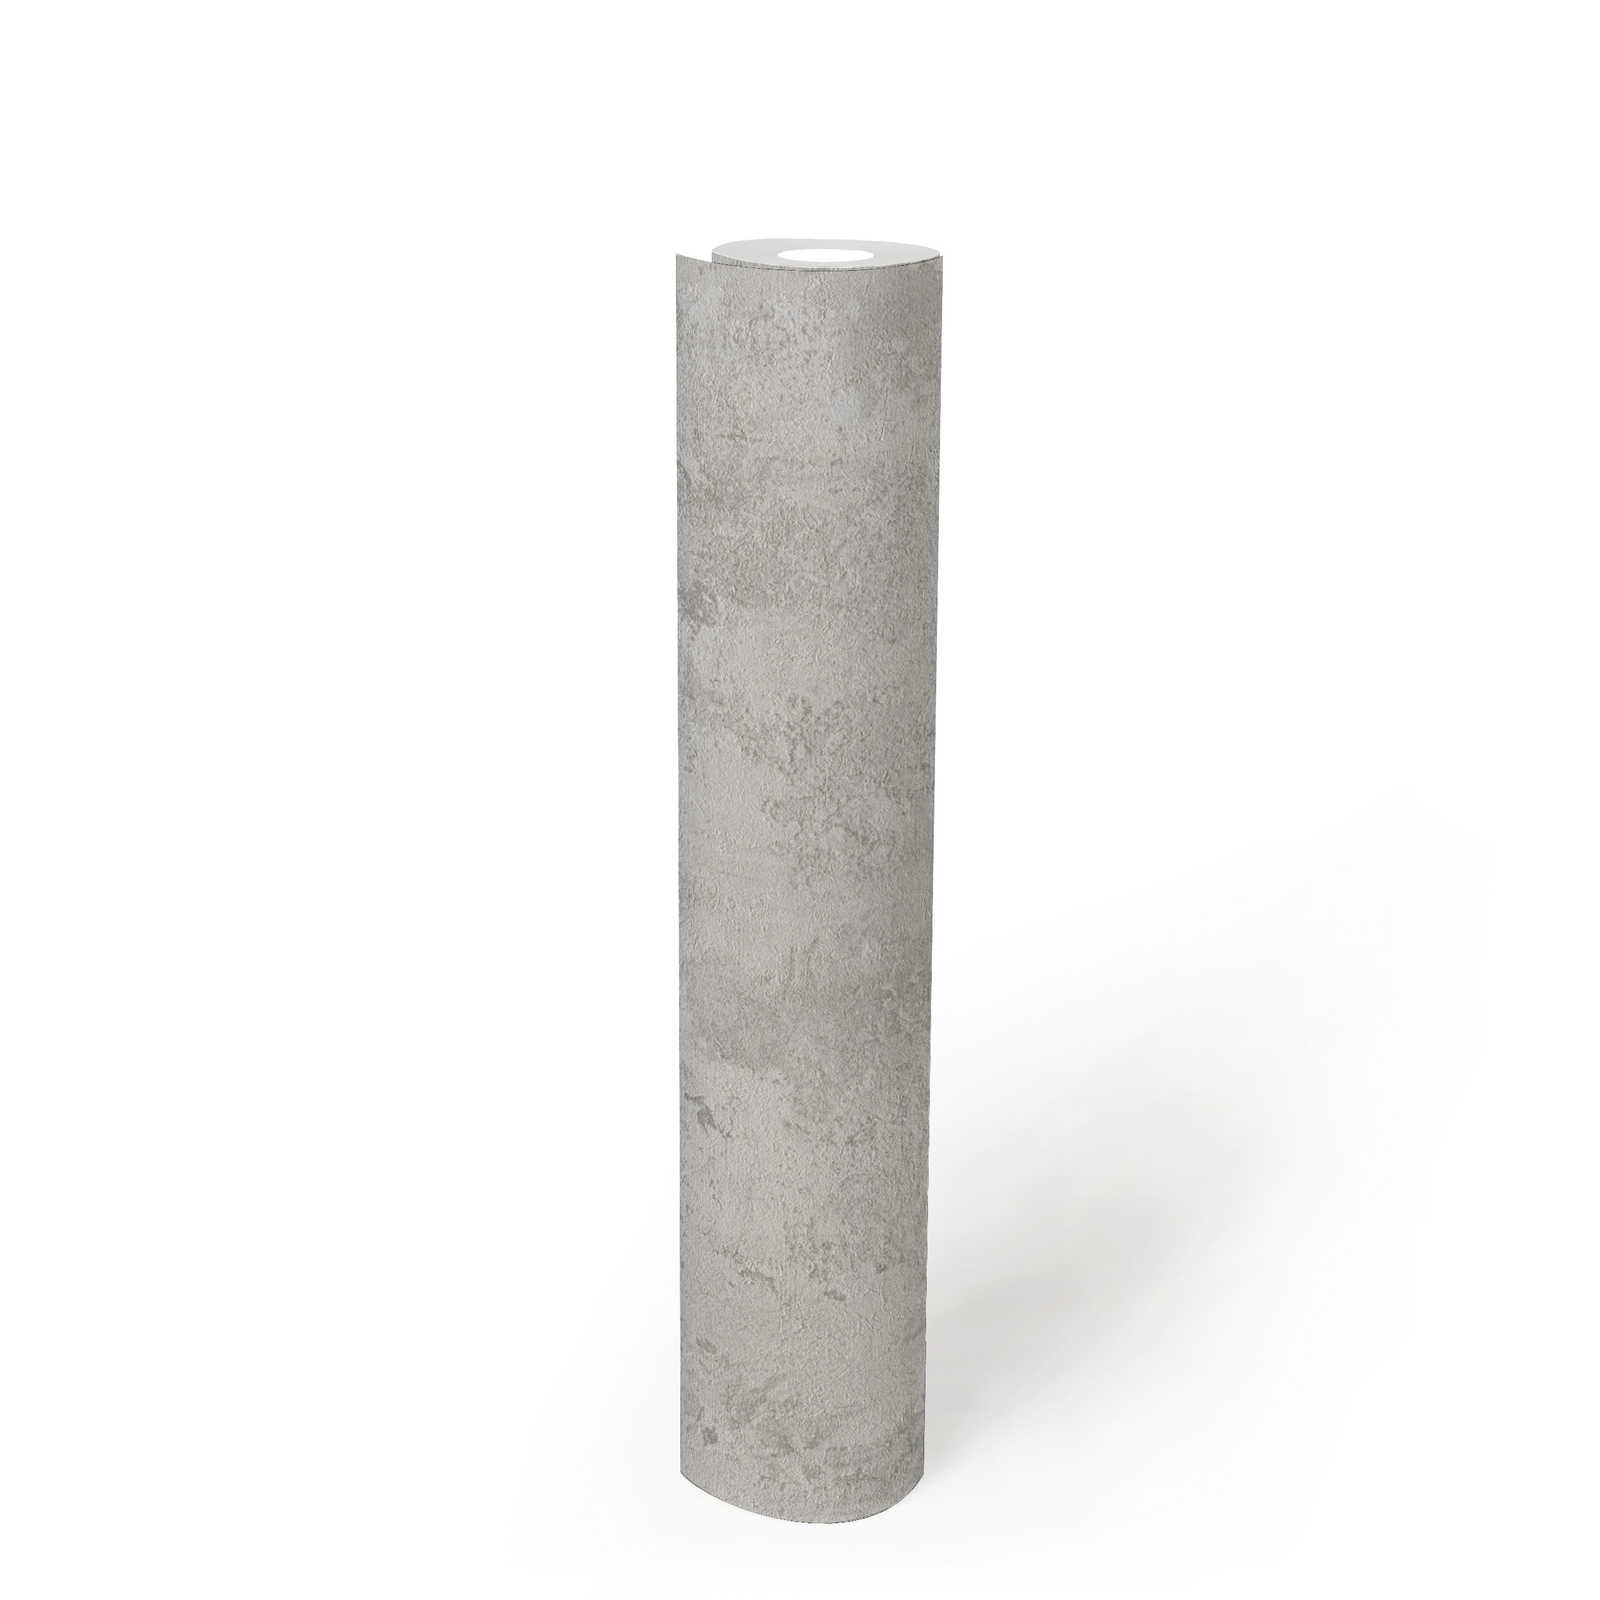             Grey concrete look wallpaper with used look - grey
        